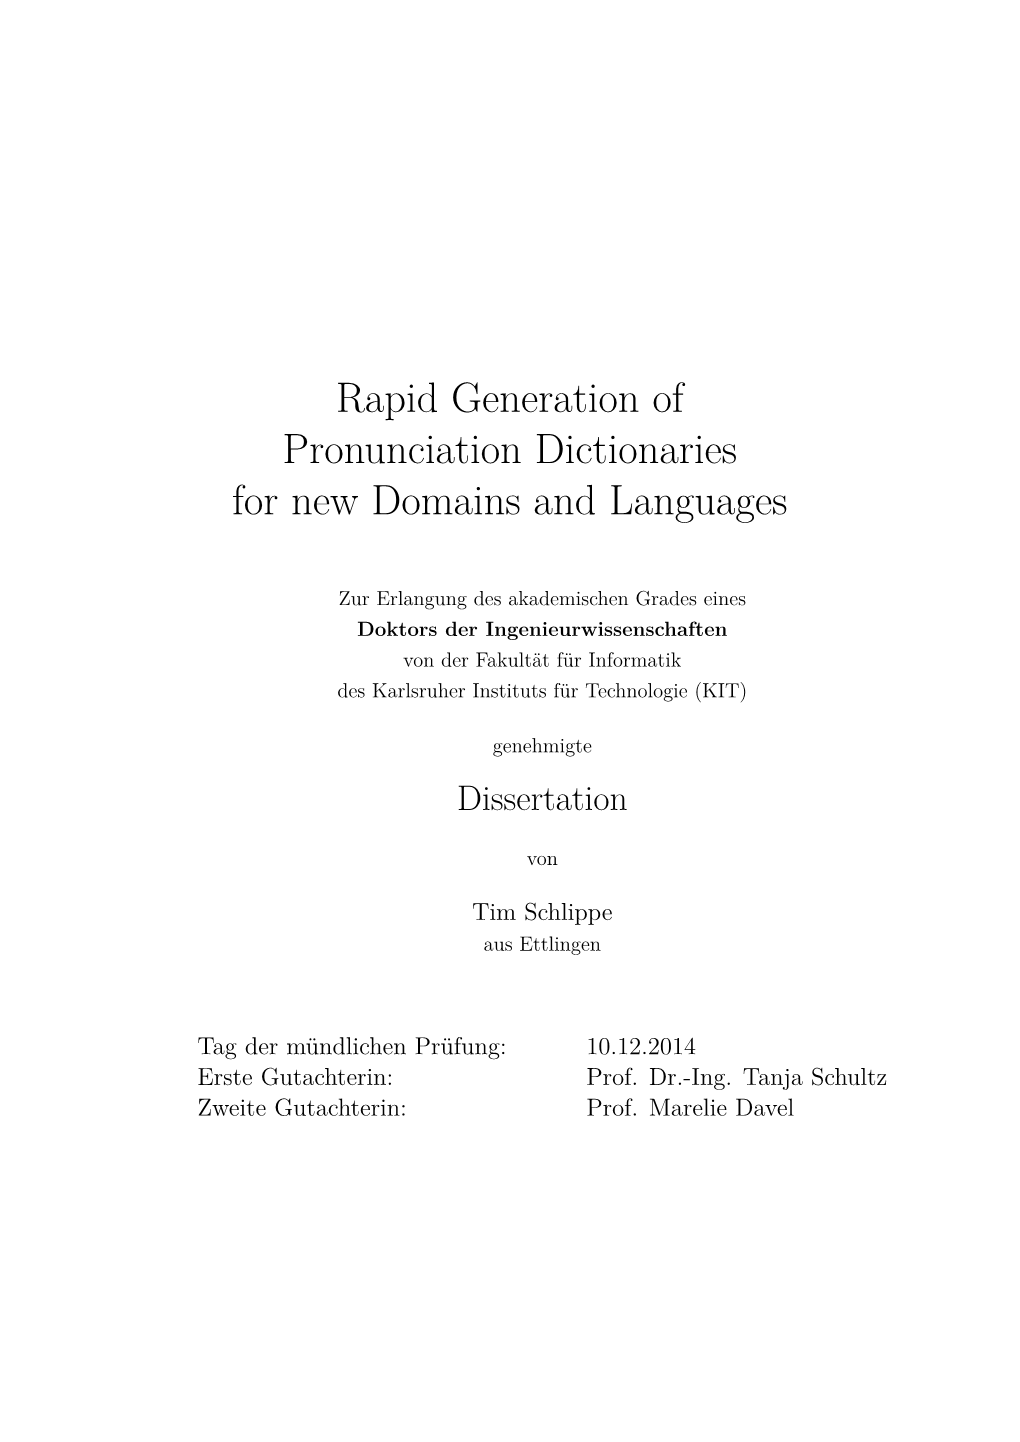 Rapid Generation of Pronunciation Dictionaries for New Domains and Languages